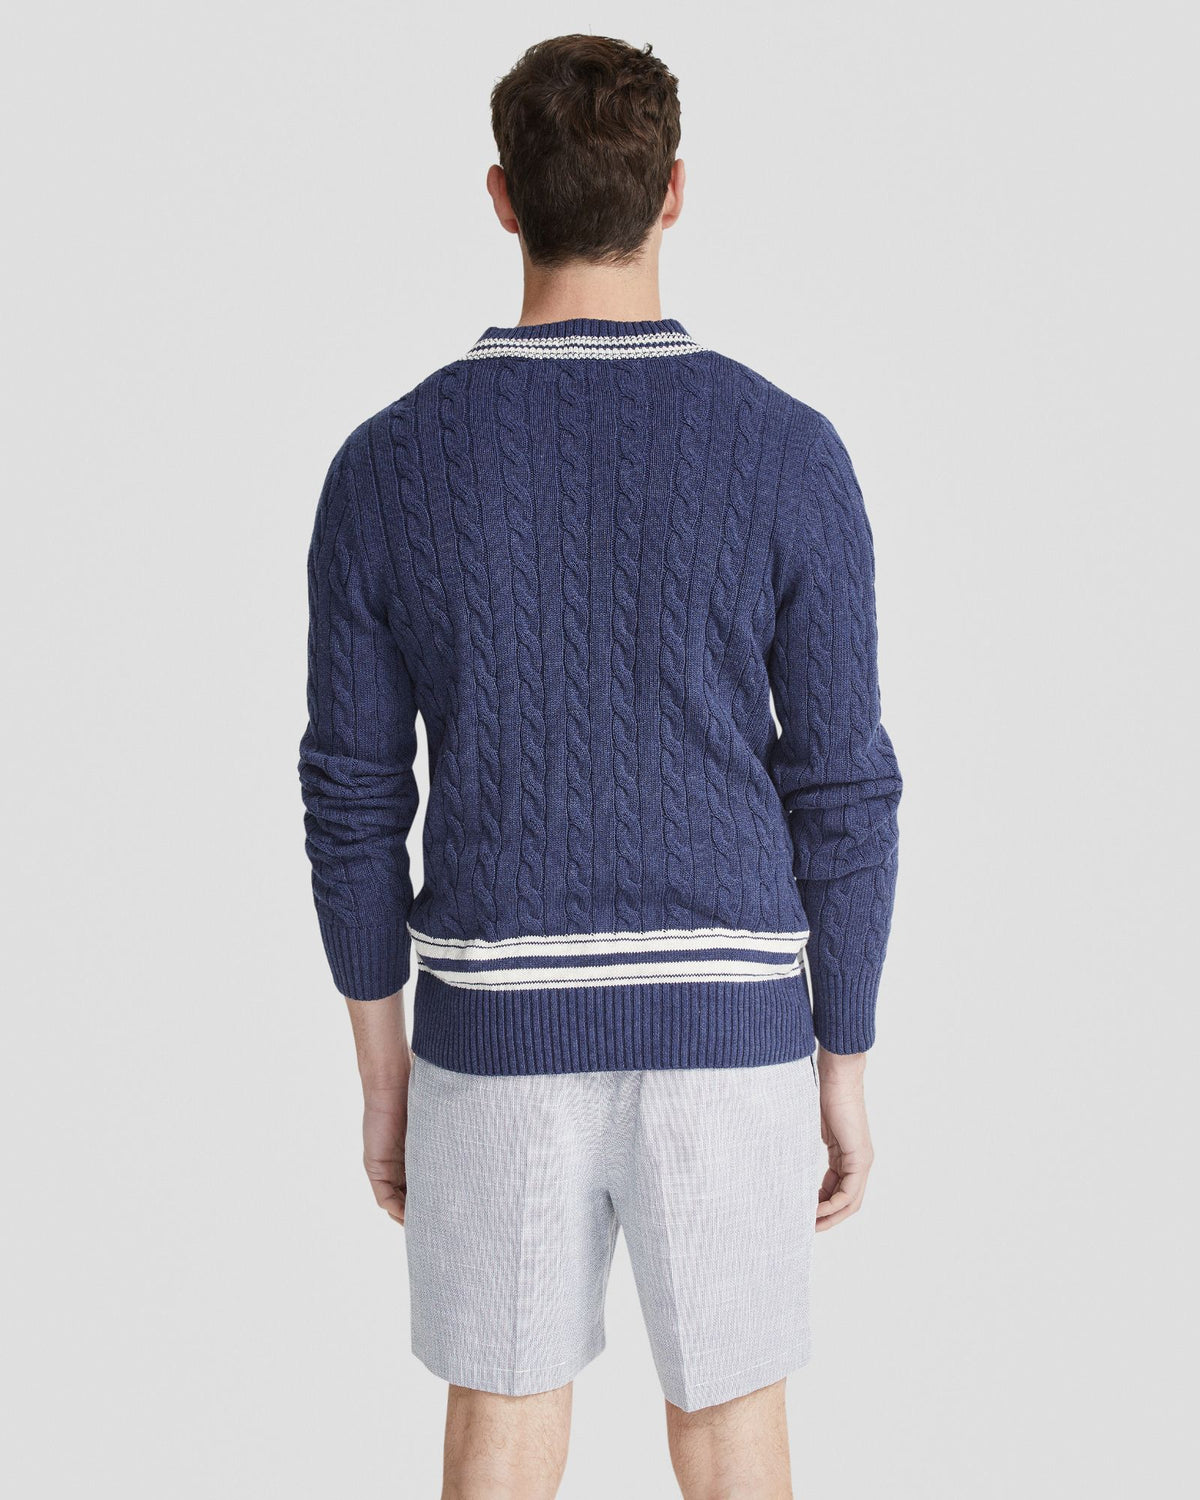 RICHIE CRICKET CABLE KNIT TOP MENS KNITWEAR